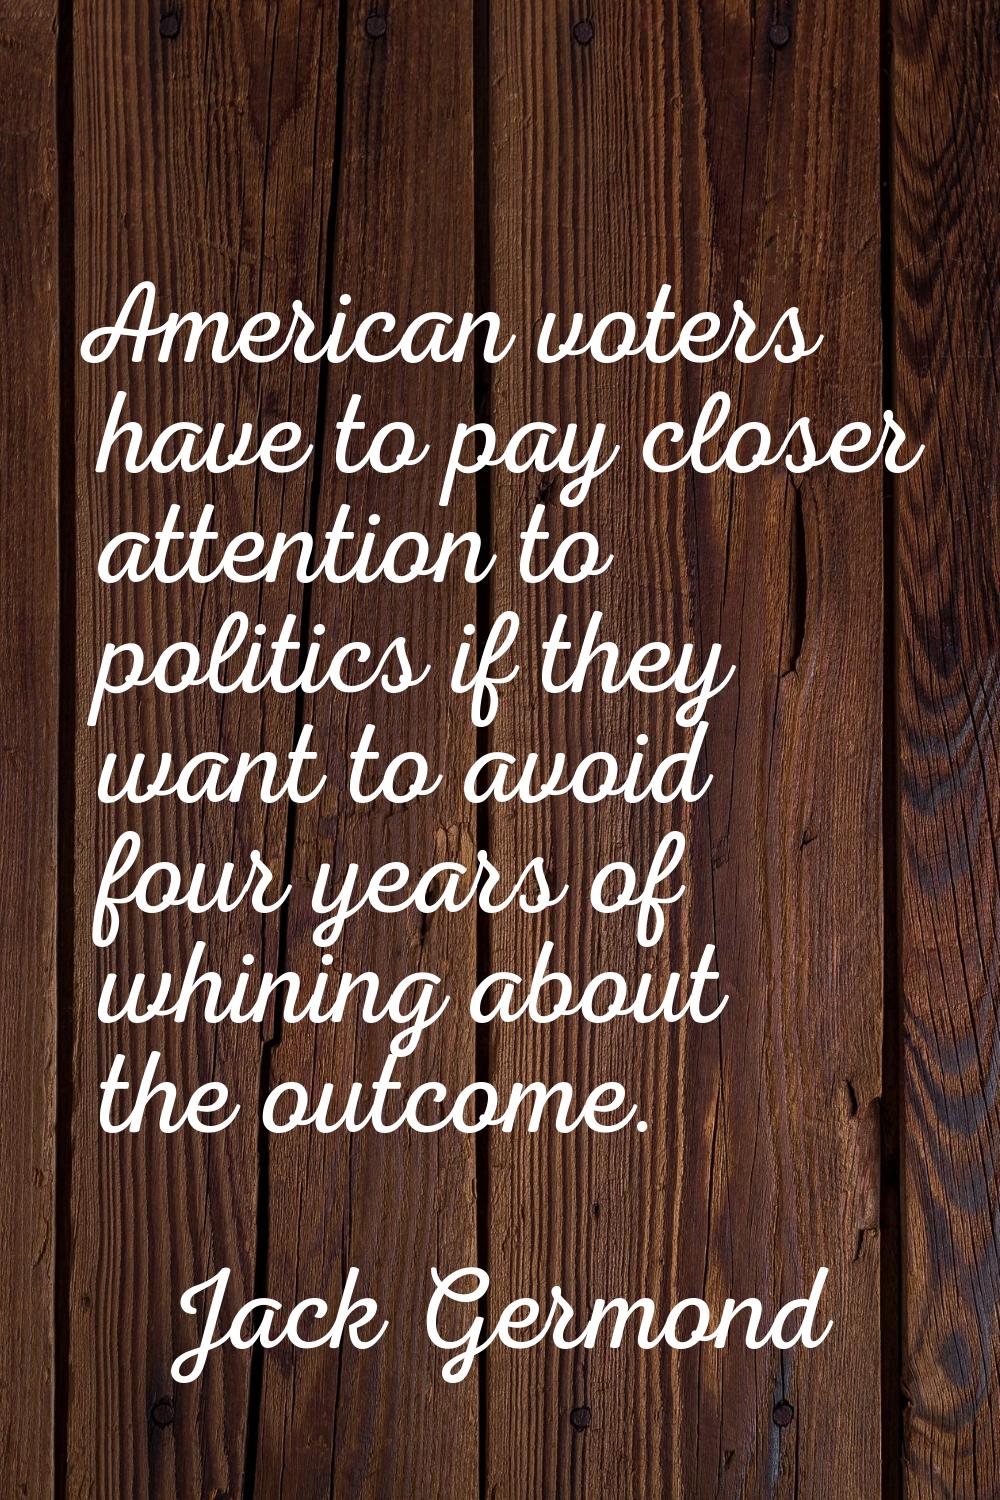 American voters have to pay closer attention to politics if they want to avoid four years of whinin